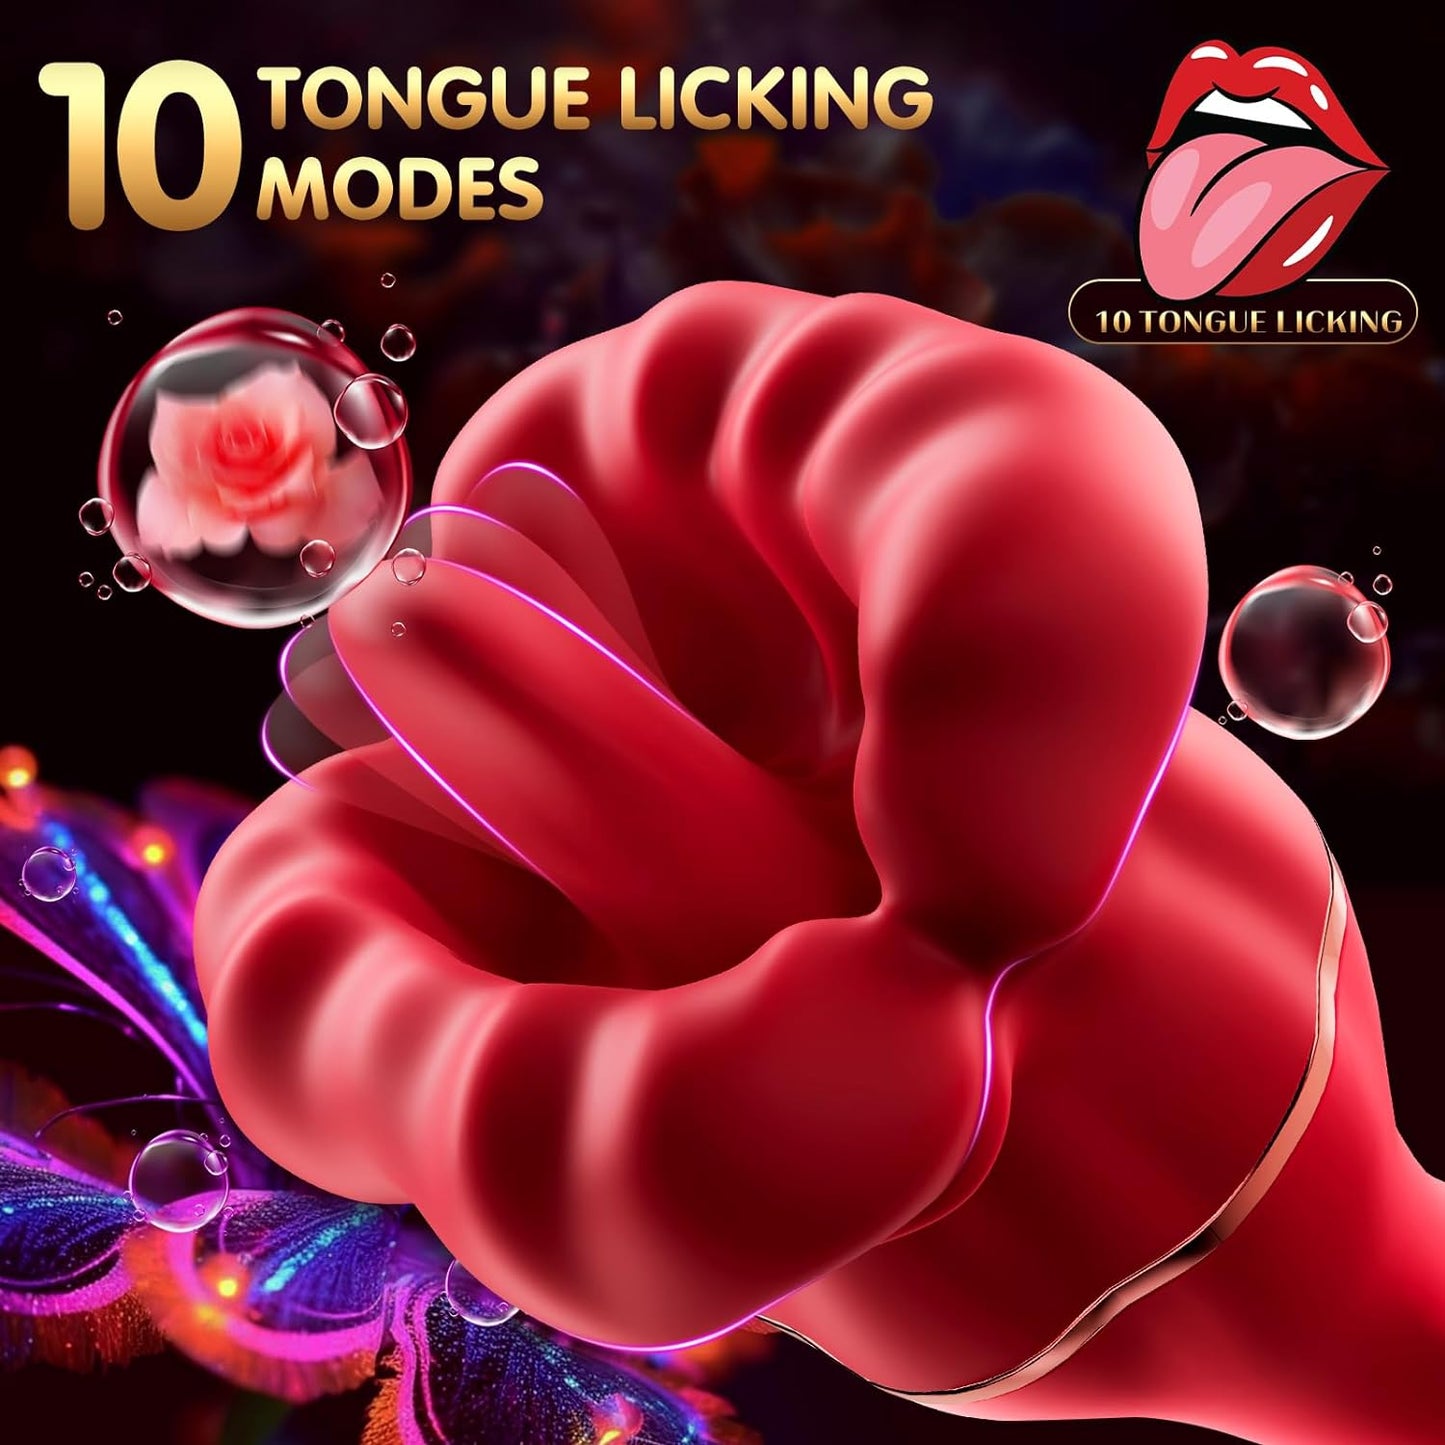 Adult Sex Toys Rose Vibrator - Rose Sex Toy Clitoral Vibrators with 10 Tongue Licking & 10 Vibration Modes Clit G Spot Anal Vagina Nipple Female Sex Toys, Adult Toy Dildos Couples Sex Toys for Women